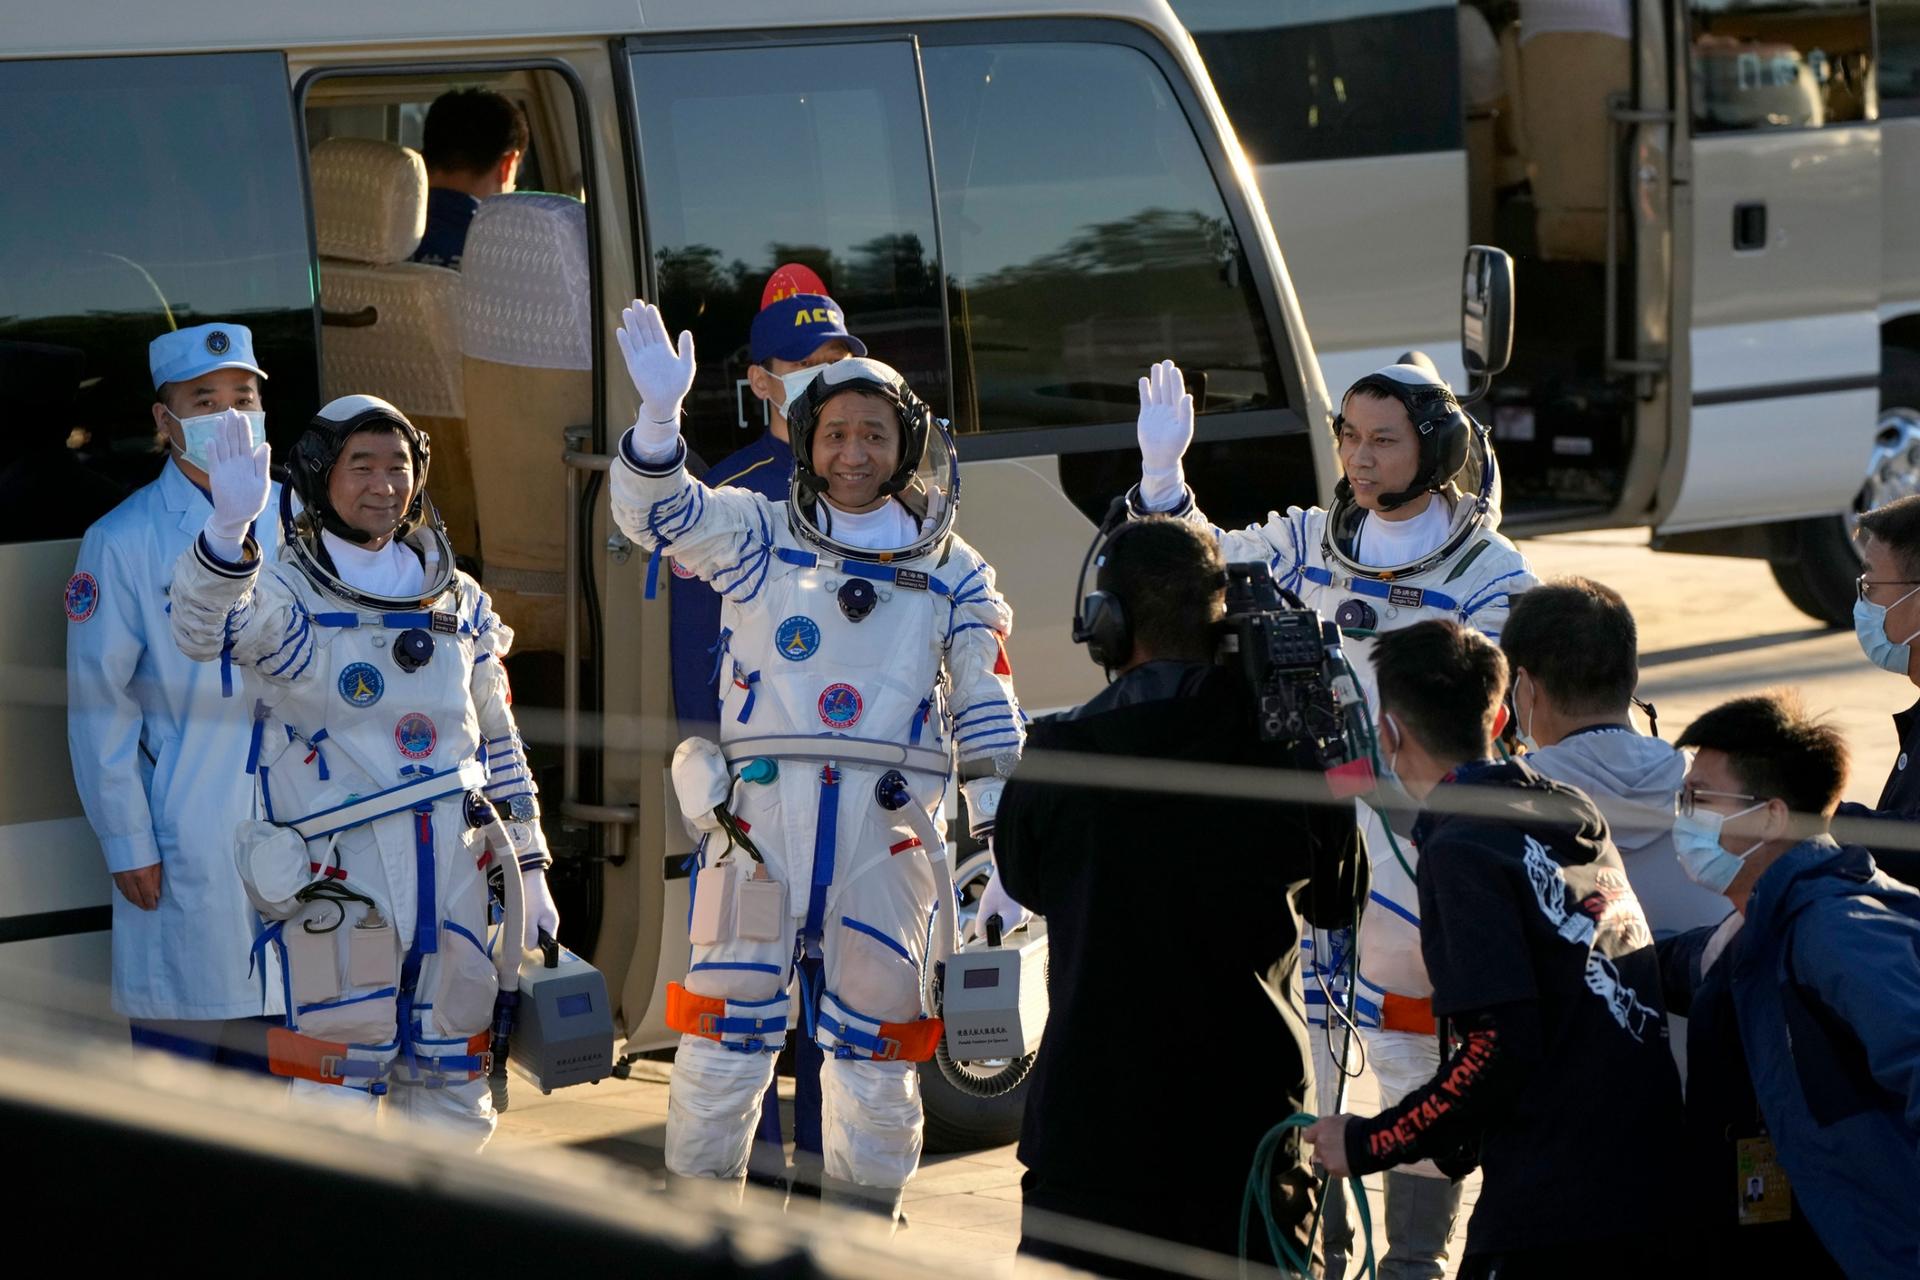 Chinese astronauts are shown wearing white and blue stripped space suits and waiving.